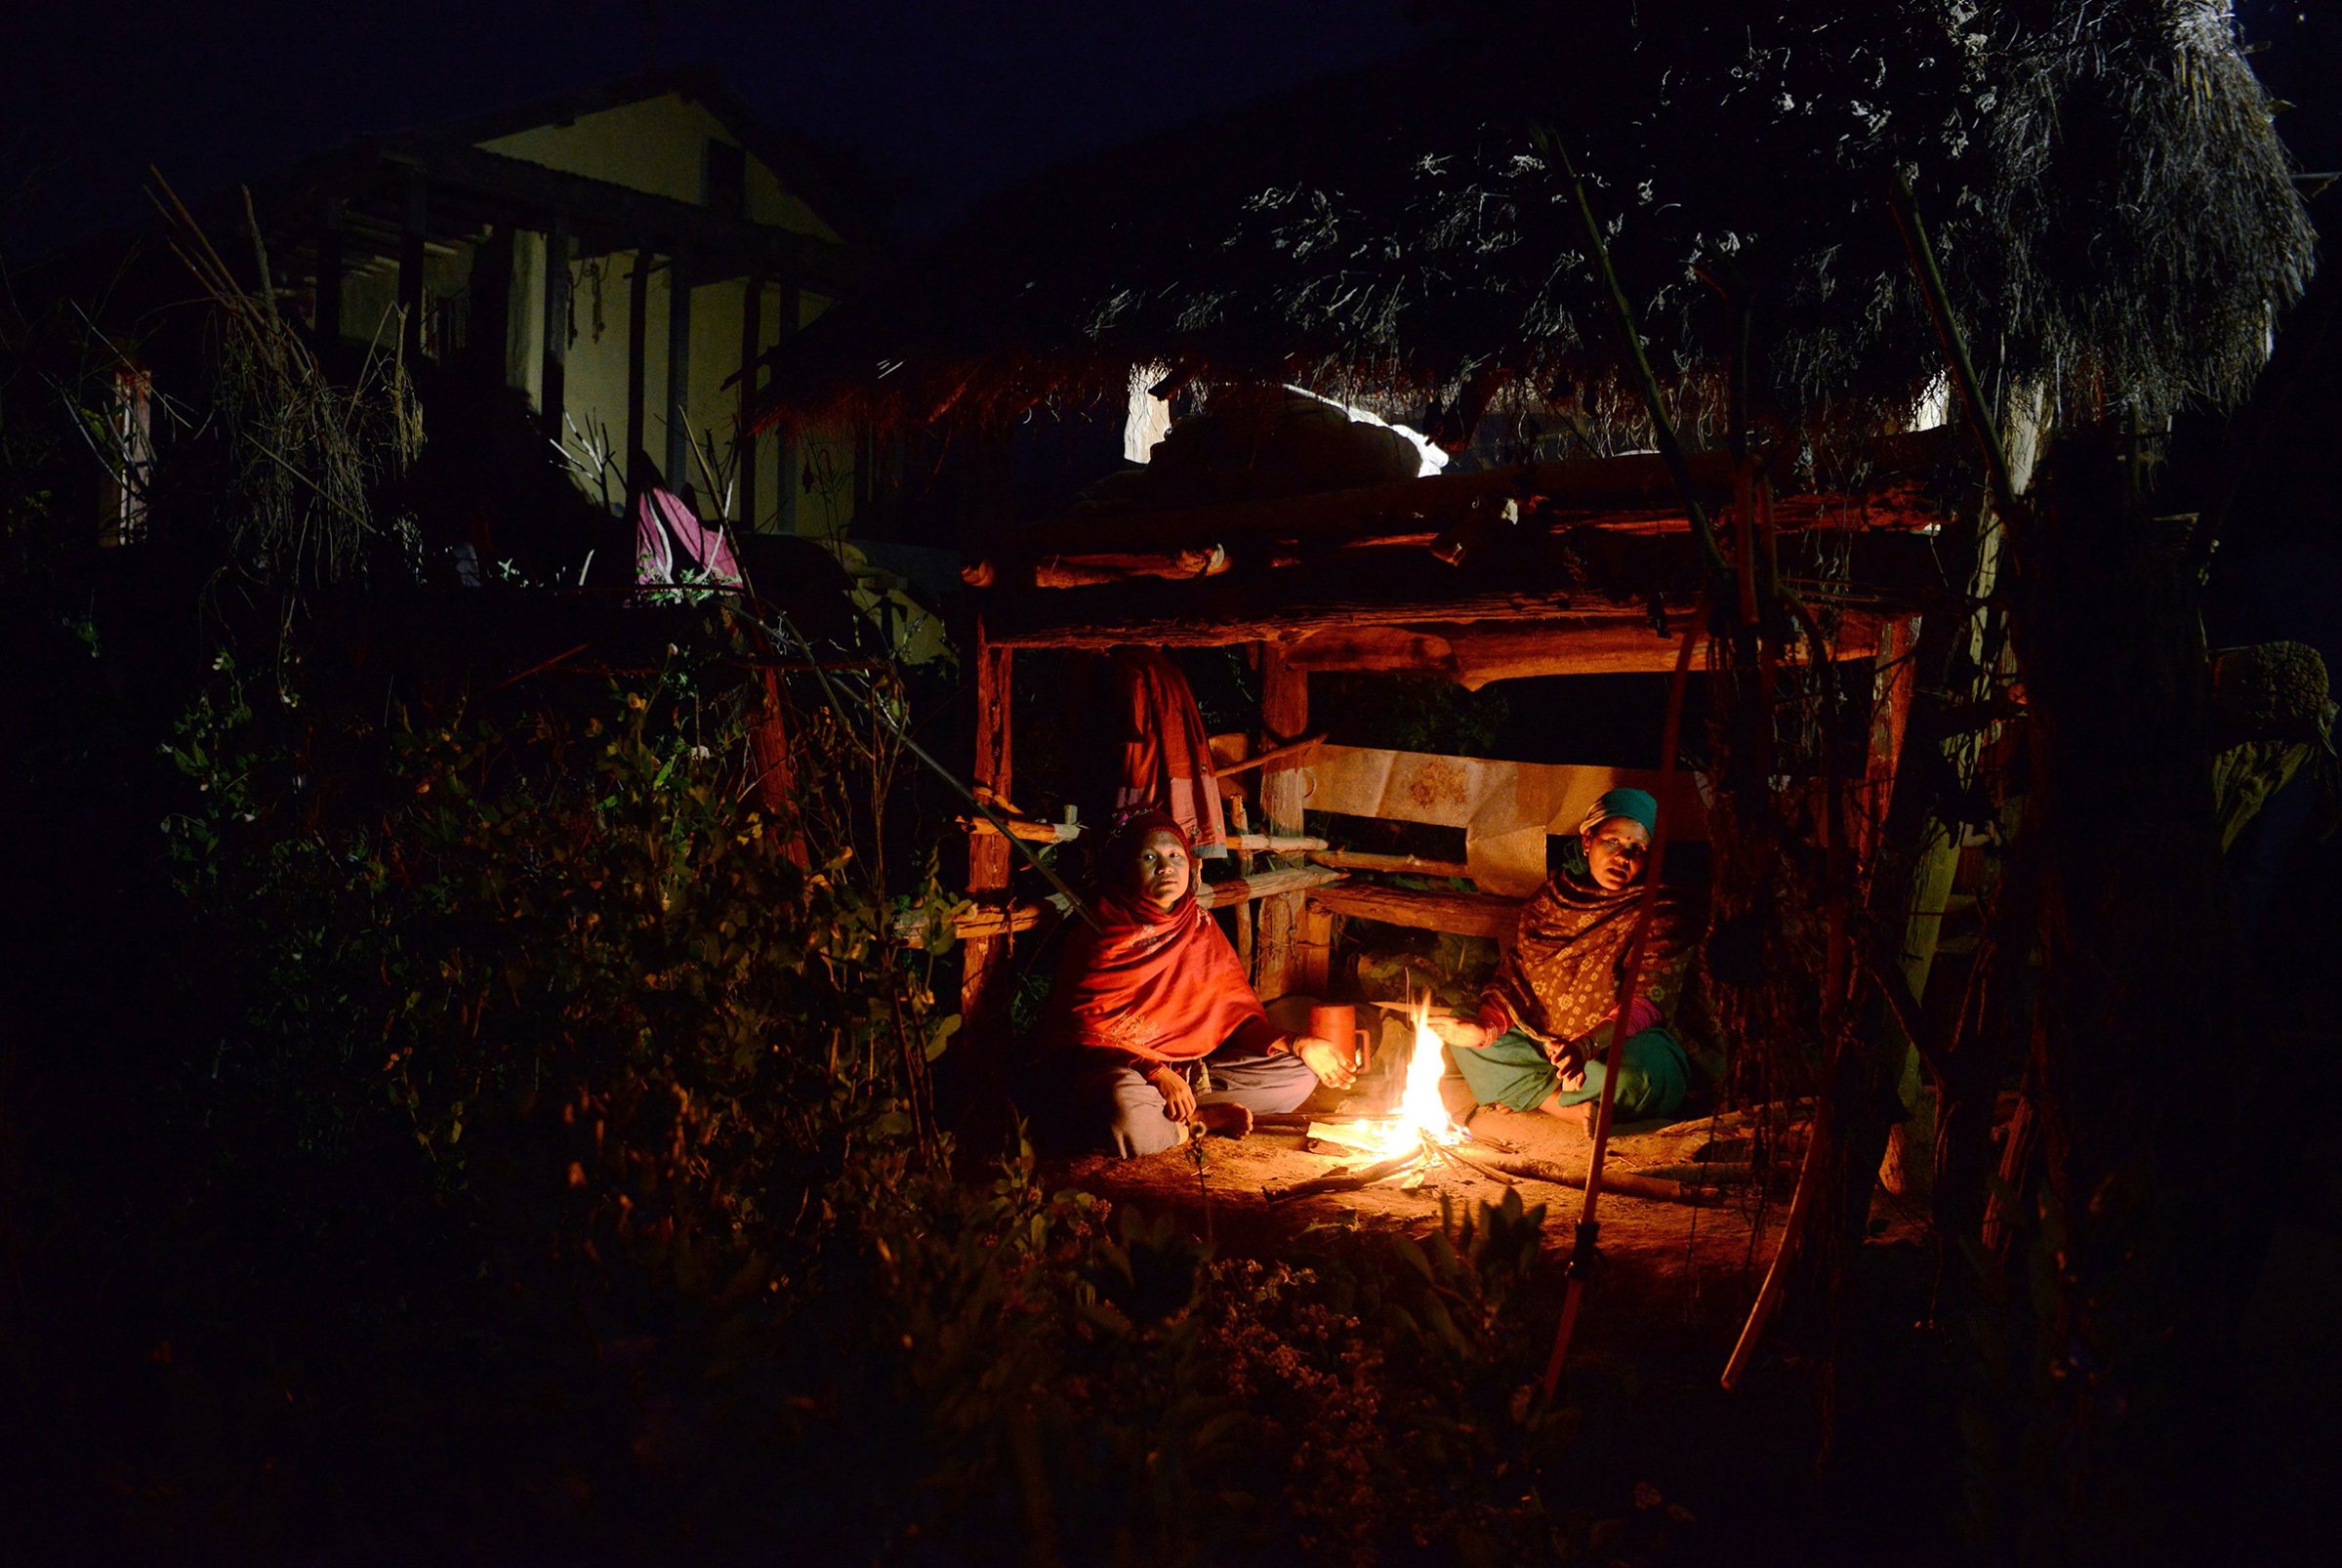 Nepalese women Pabitra Giri (L) and Yum Kumari Giri (R) sit by a fire as they live in a Chhaupadi hut during their menstruation period in Surkhet District, some 520km west of Kathmandu on Feb. 3, 2017.